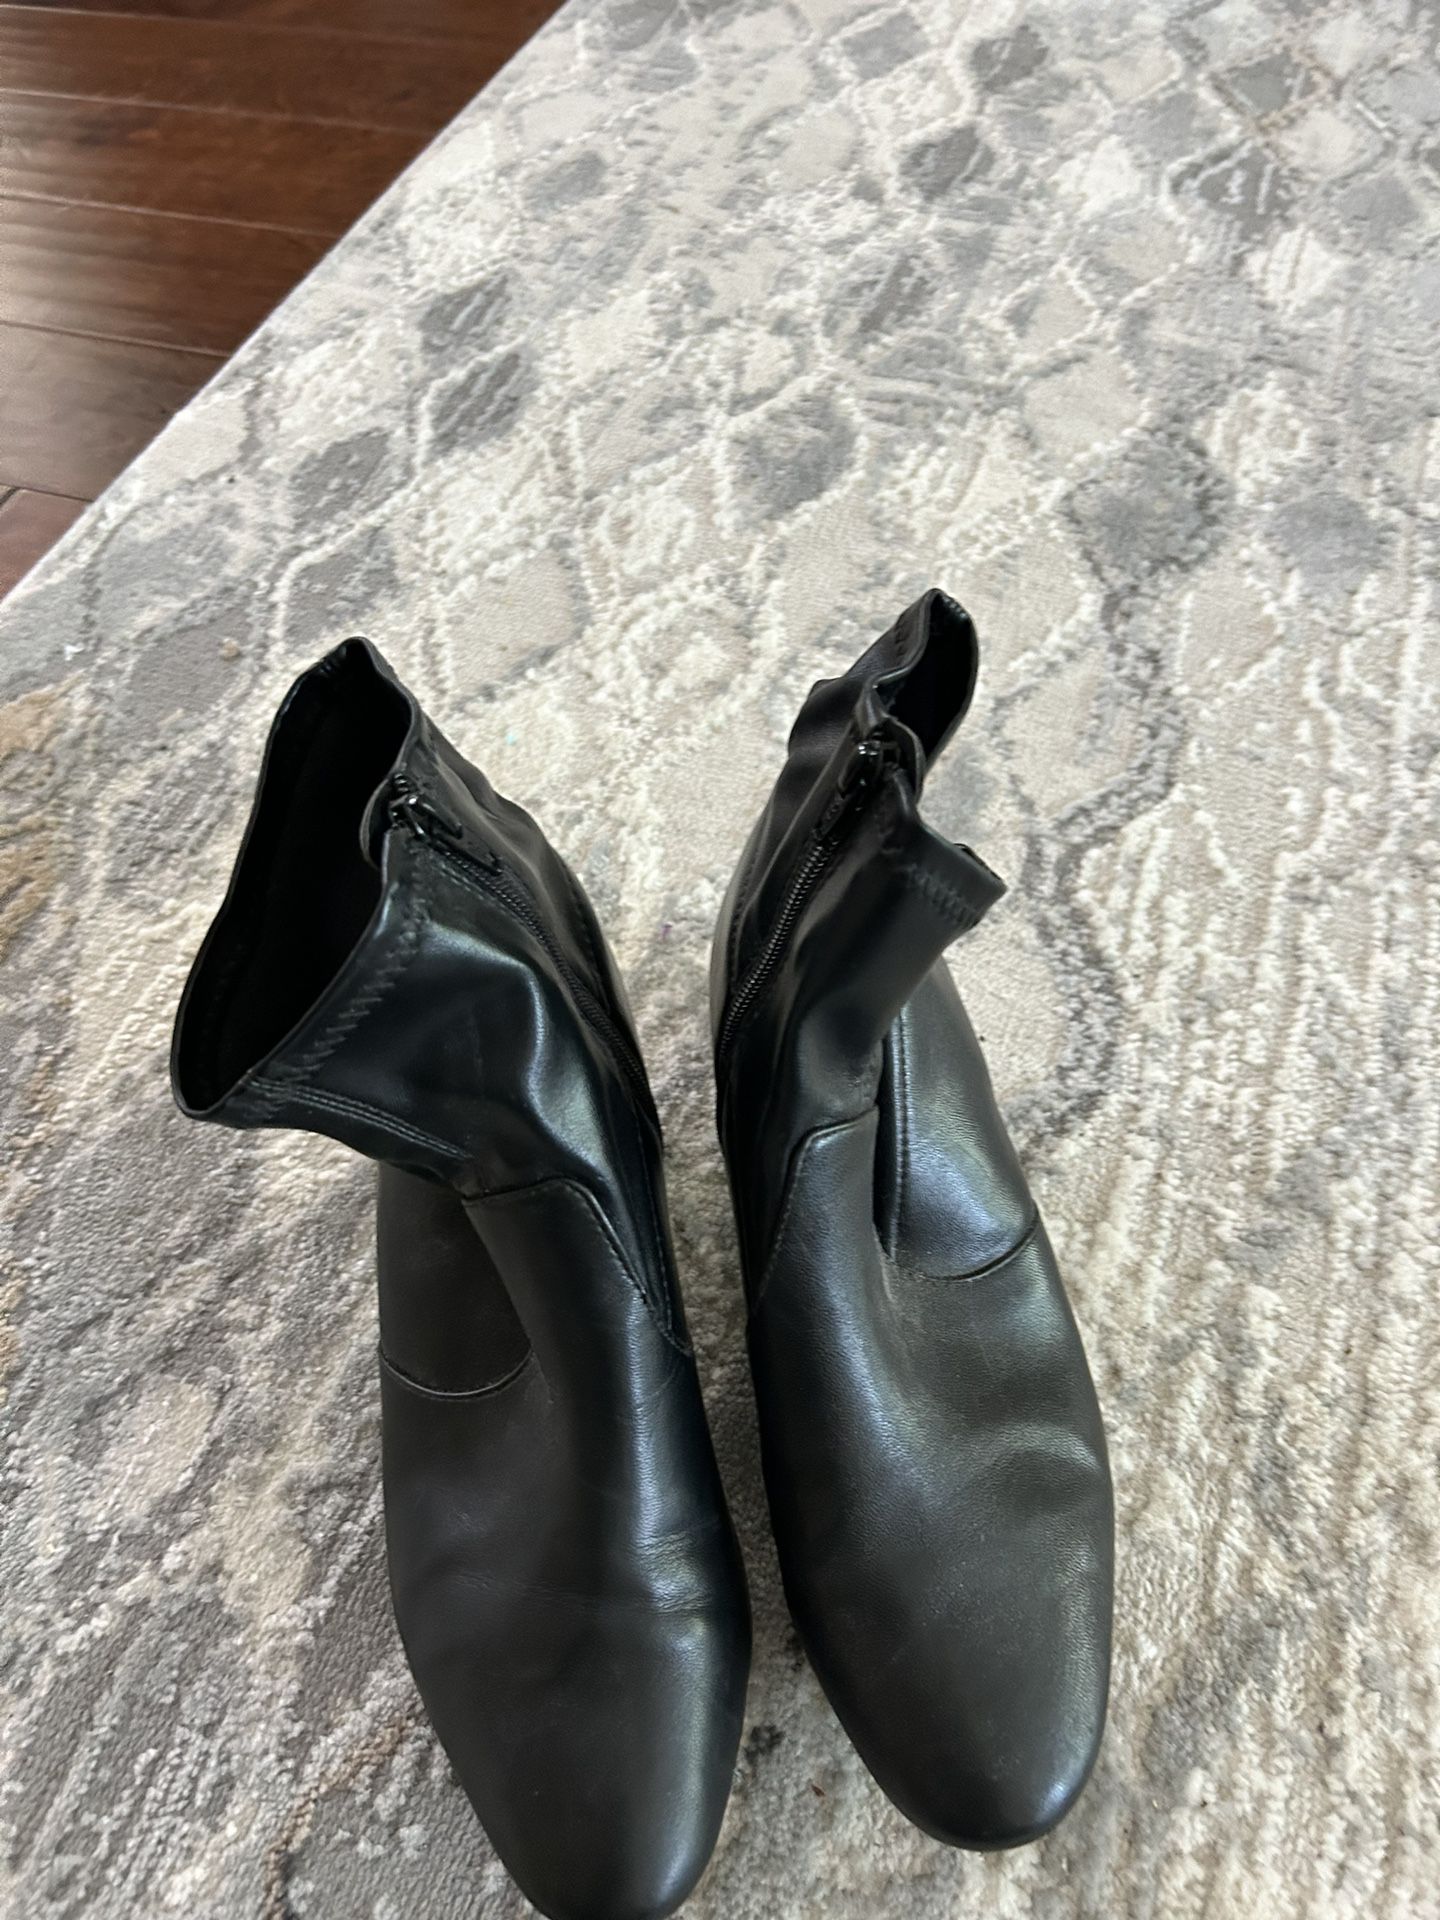 Ladies Black Leather Boots Size 8 1/2